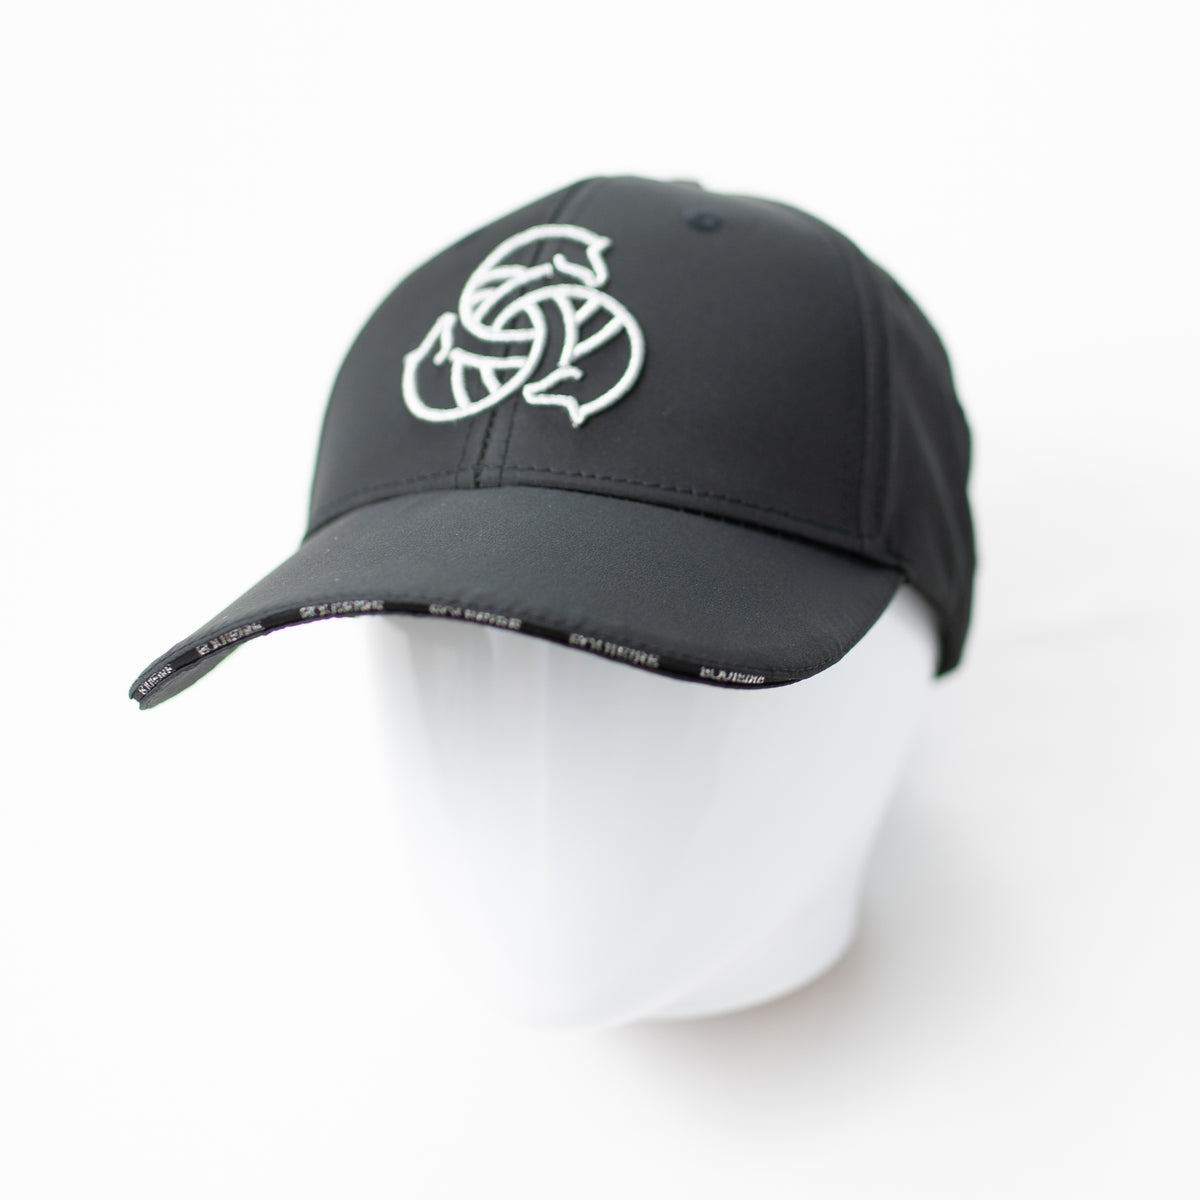 RAVEN Gold | Limited Edition Equestrian Sports Cap